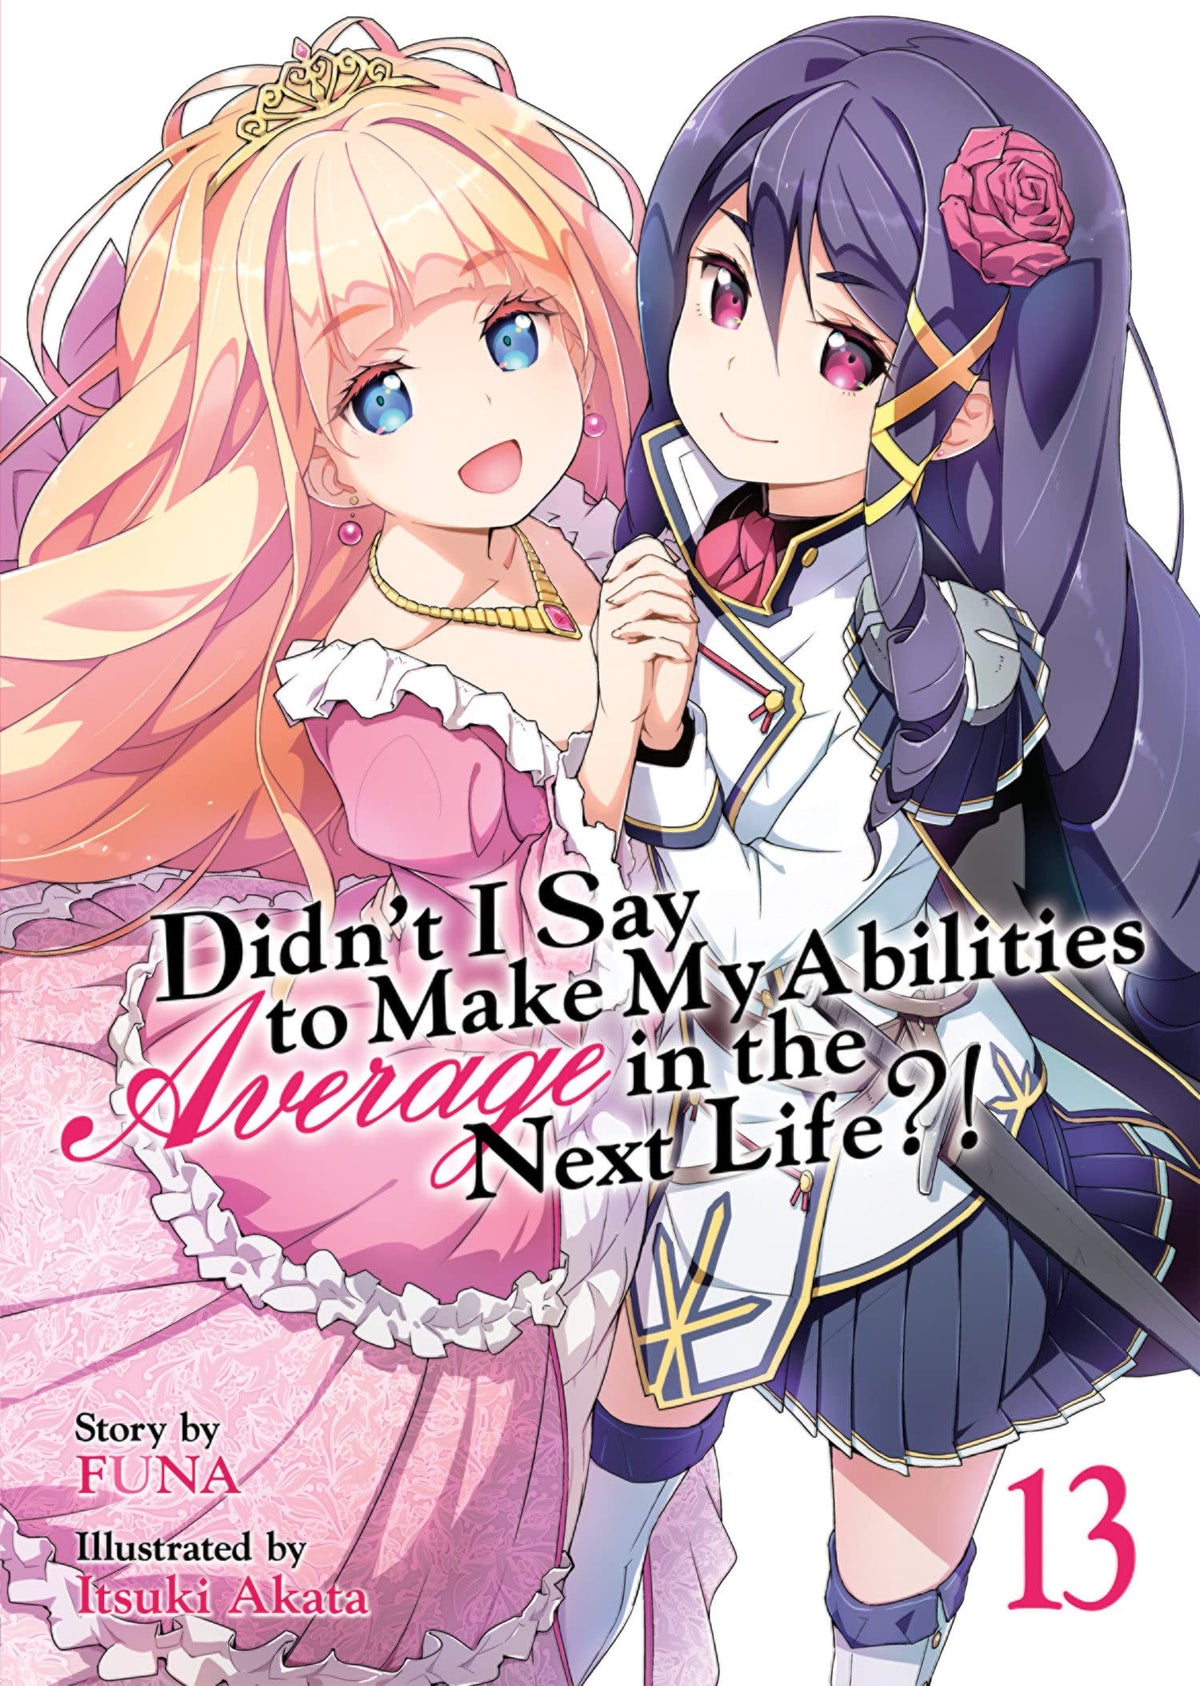 Didn’t I Say to Make My Abilities Average in the Next Life?! (Light Novel) Vol. 13